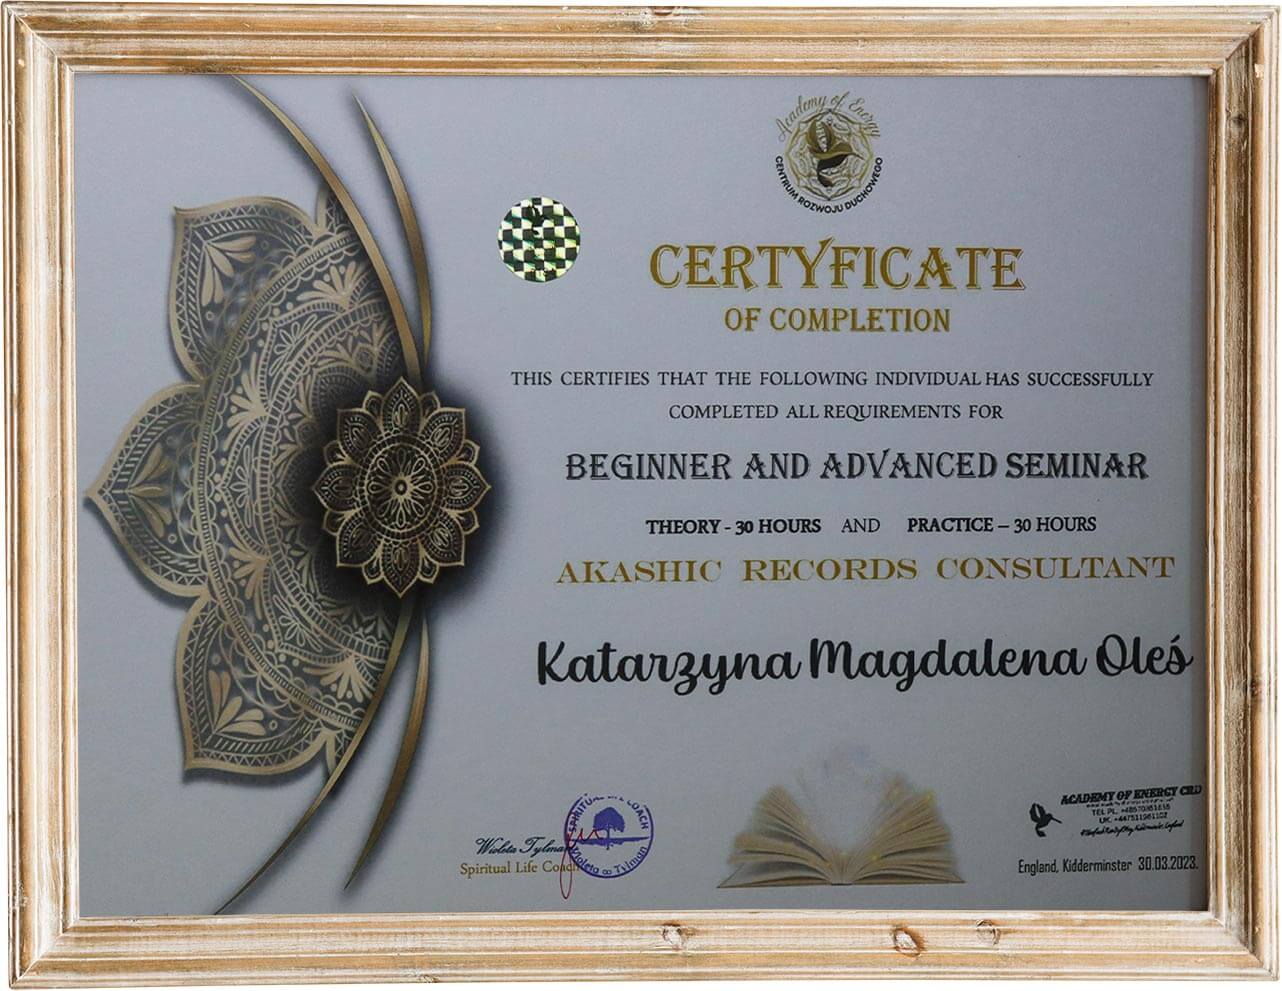 Certificate "Akashic Records Consultant"